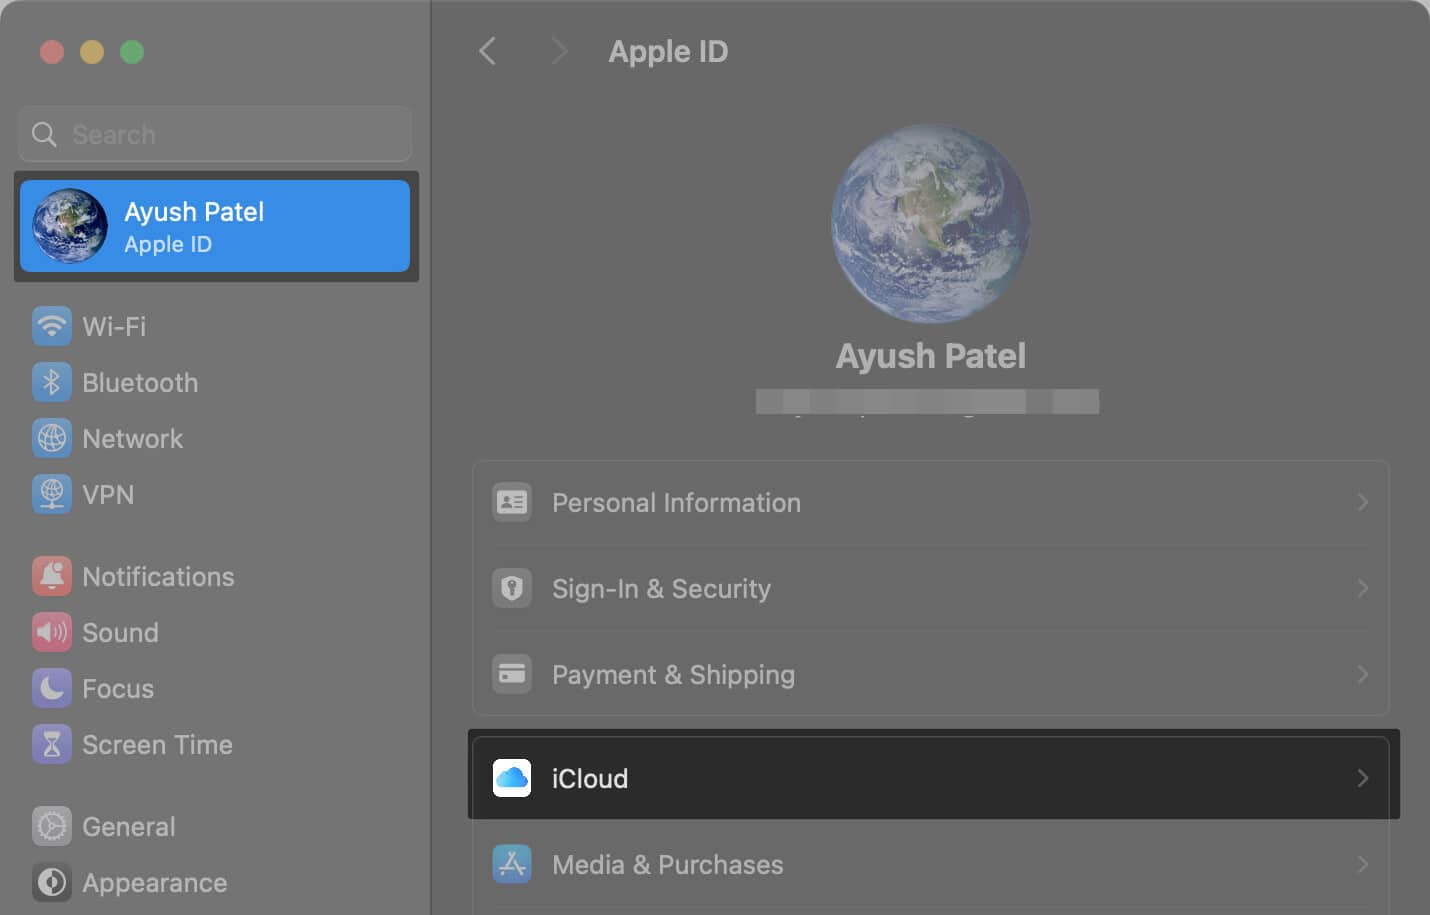 Select Apple ID and go to iCloud